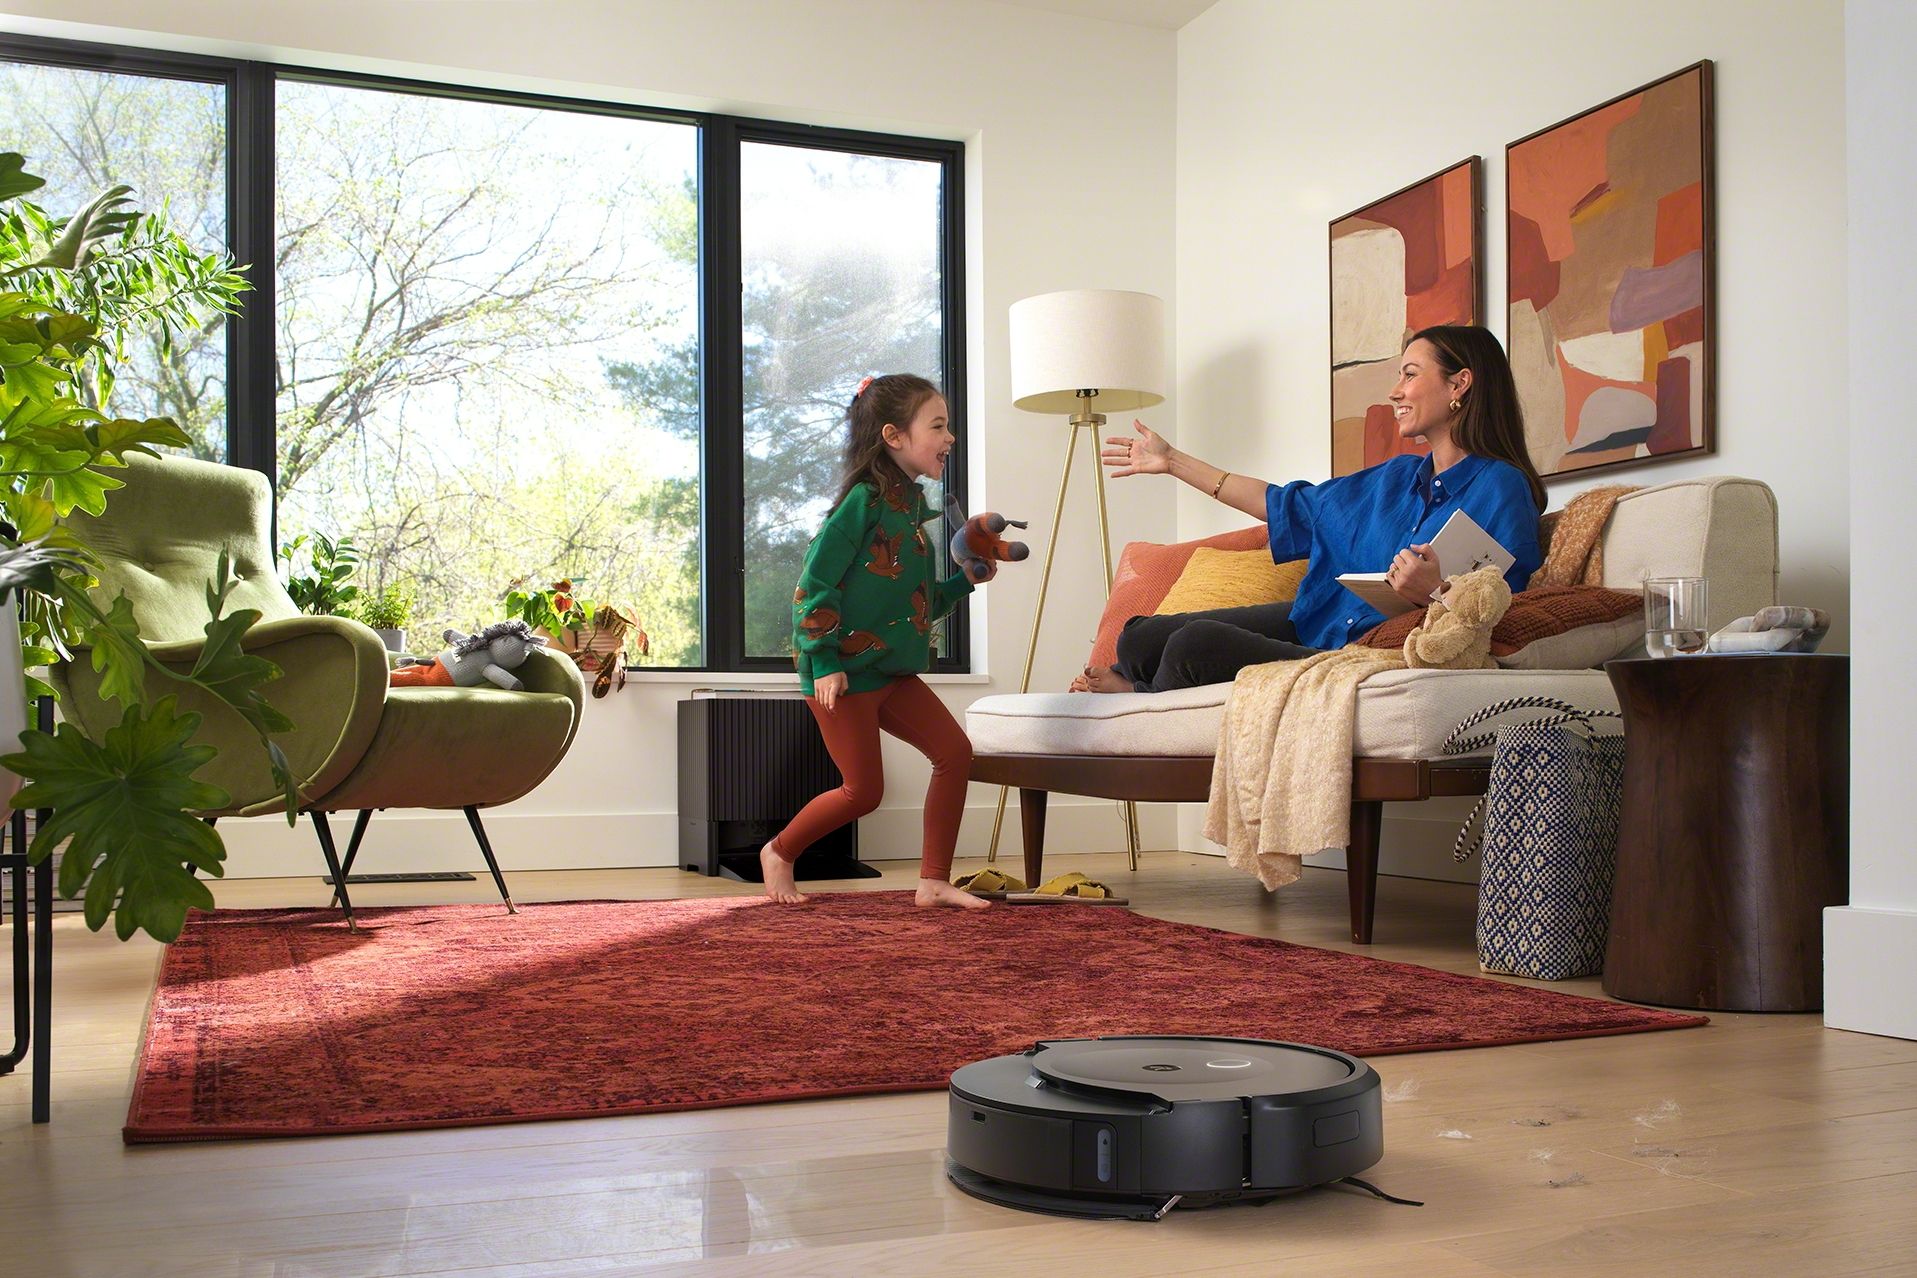 Mother and daughter in a living room, with iRobot's Roomba robot cleaning the floor.